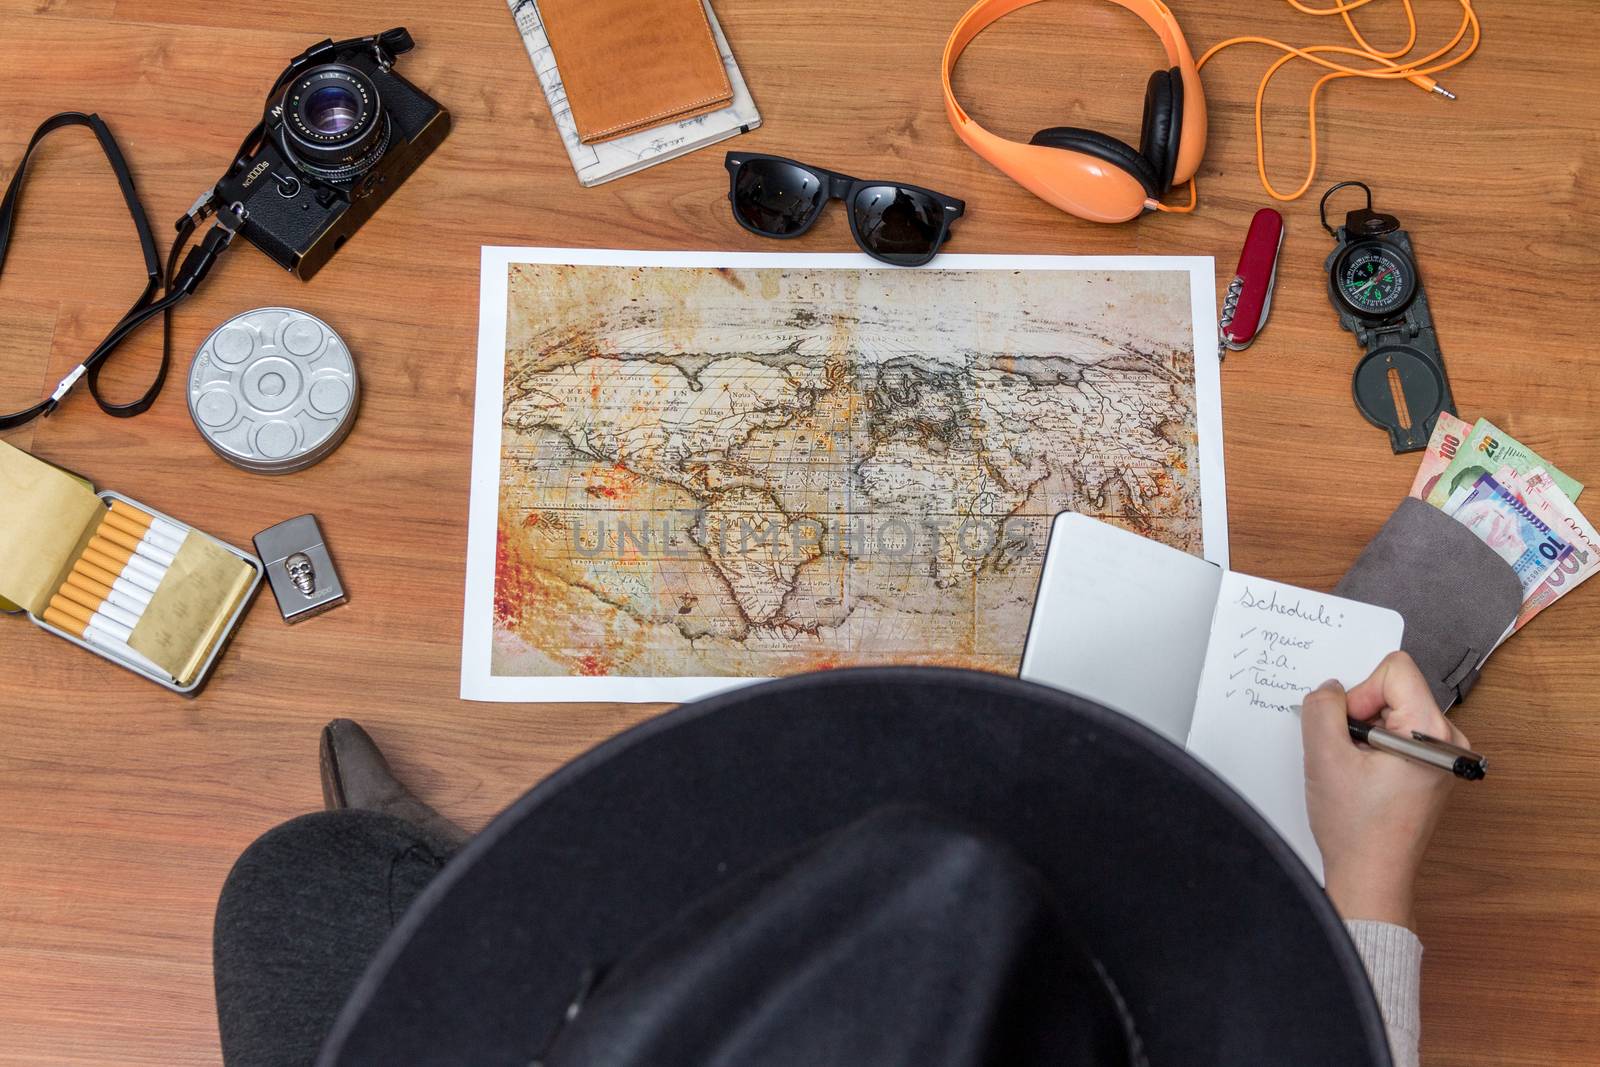 Young woman planning vacation using world map and compass along with other travel accessories. Tourist wearing brown hat looking at the world map.